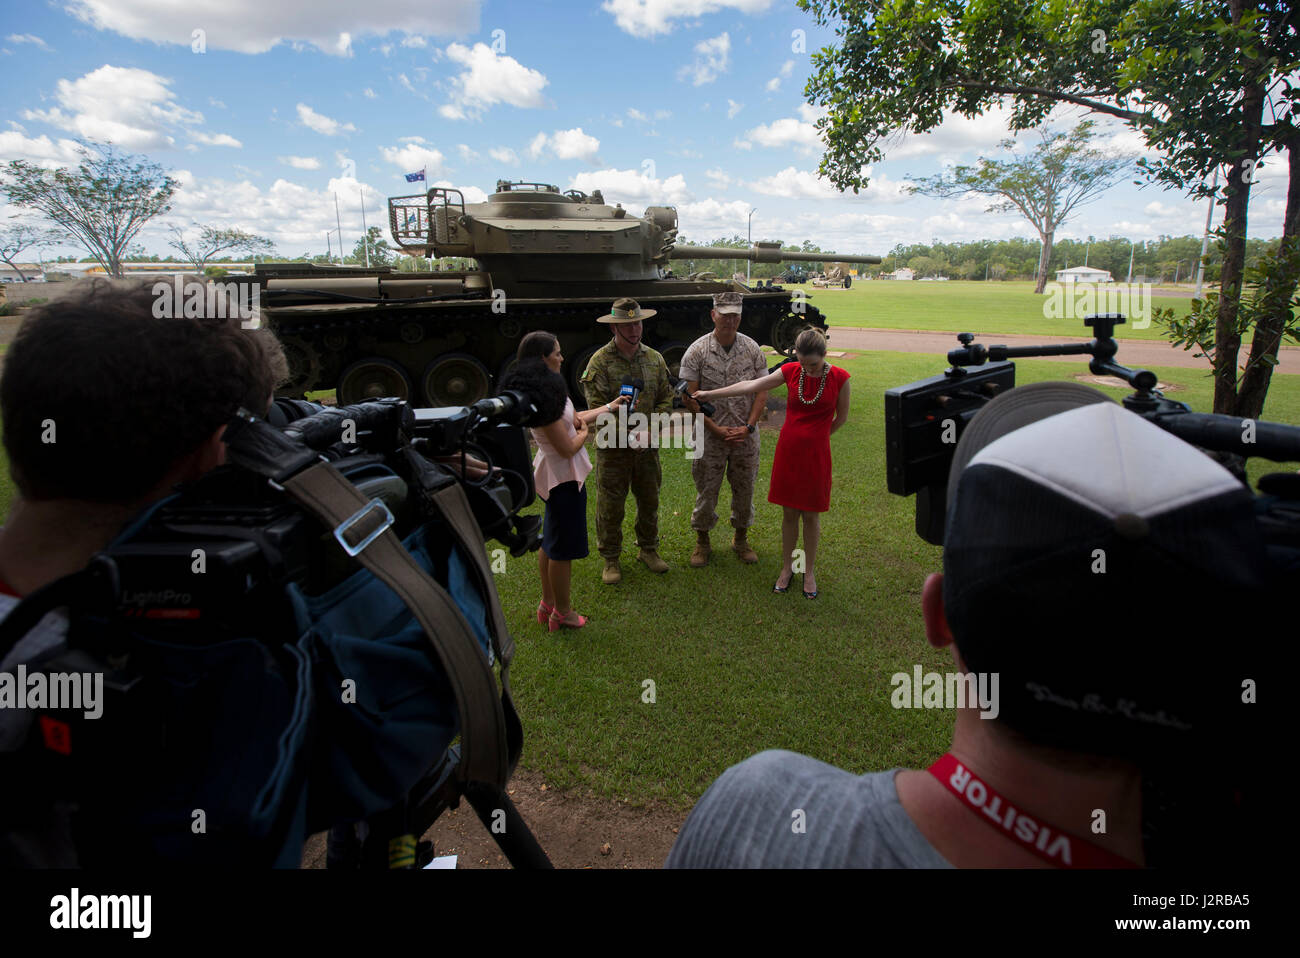 ROBERTSON BARRACKS, Darwin – U.S. Marine Lt. Col. Brian Middleton, commanding officer of 3rd Battalion, 4th Marine Regiment, 1st Marine Division, Marine Rotational Force Darwin 17.2 and 1st Brigade headquarters Chief of Staff, James Ryan, Australian Army, answer questions for local media outlets after a Welcome to Country ceremony in Australia, April 21, 2017. The ceremony is a symbol of the strong partnership between the U.S. and Australia. (U.S. Marine Corps photo by Lance Cpl. Damion Hatch Jr) Stock Photo